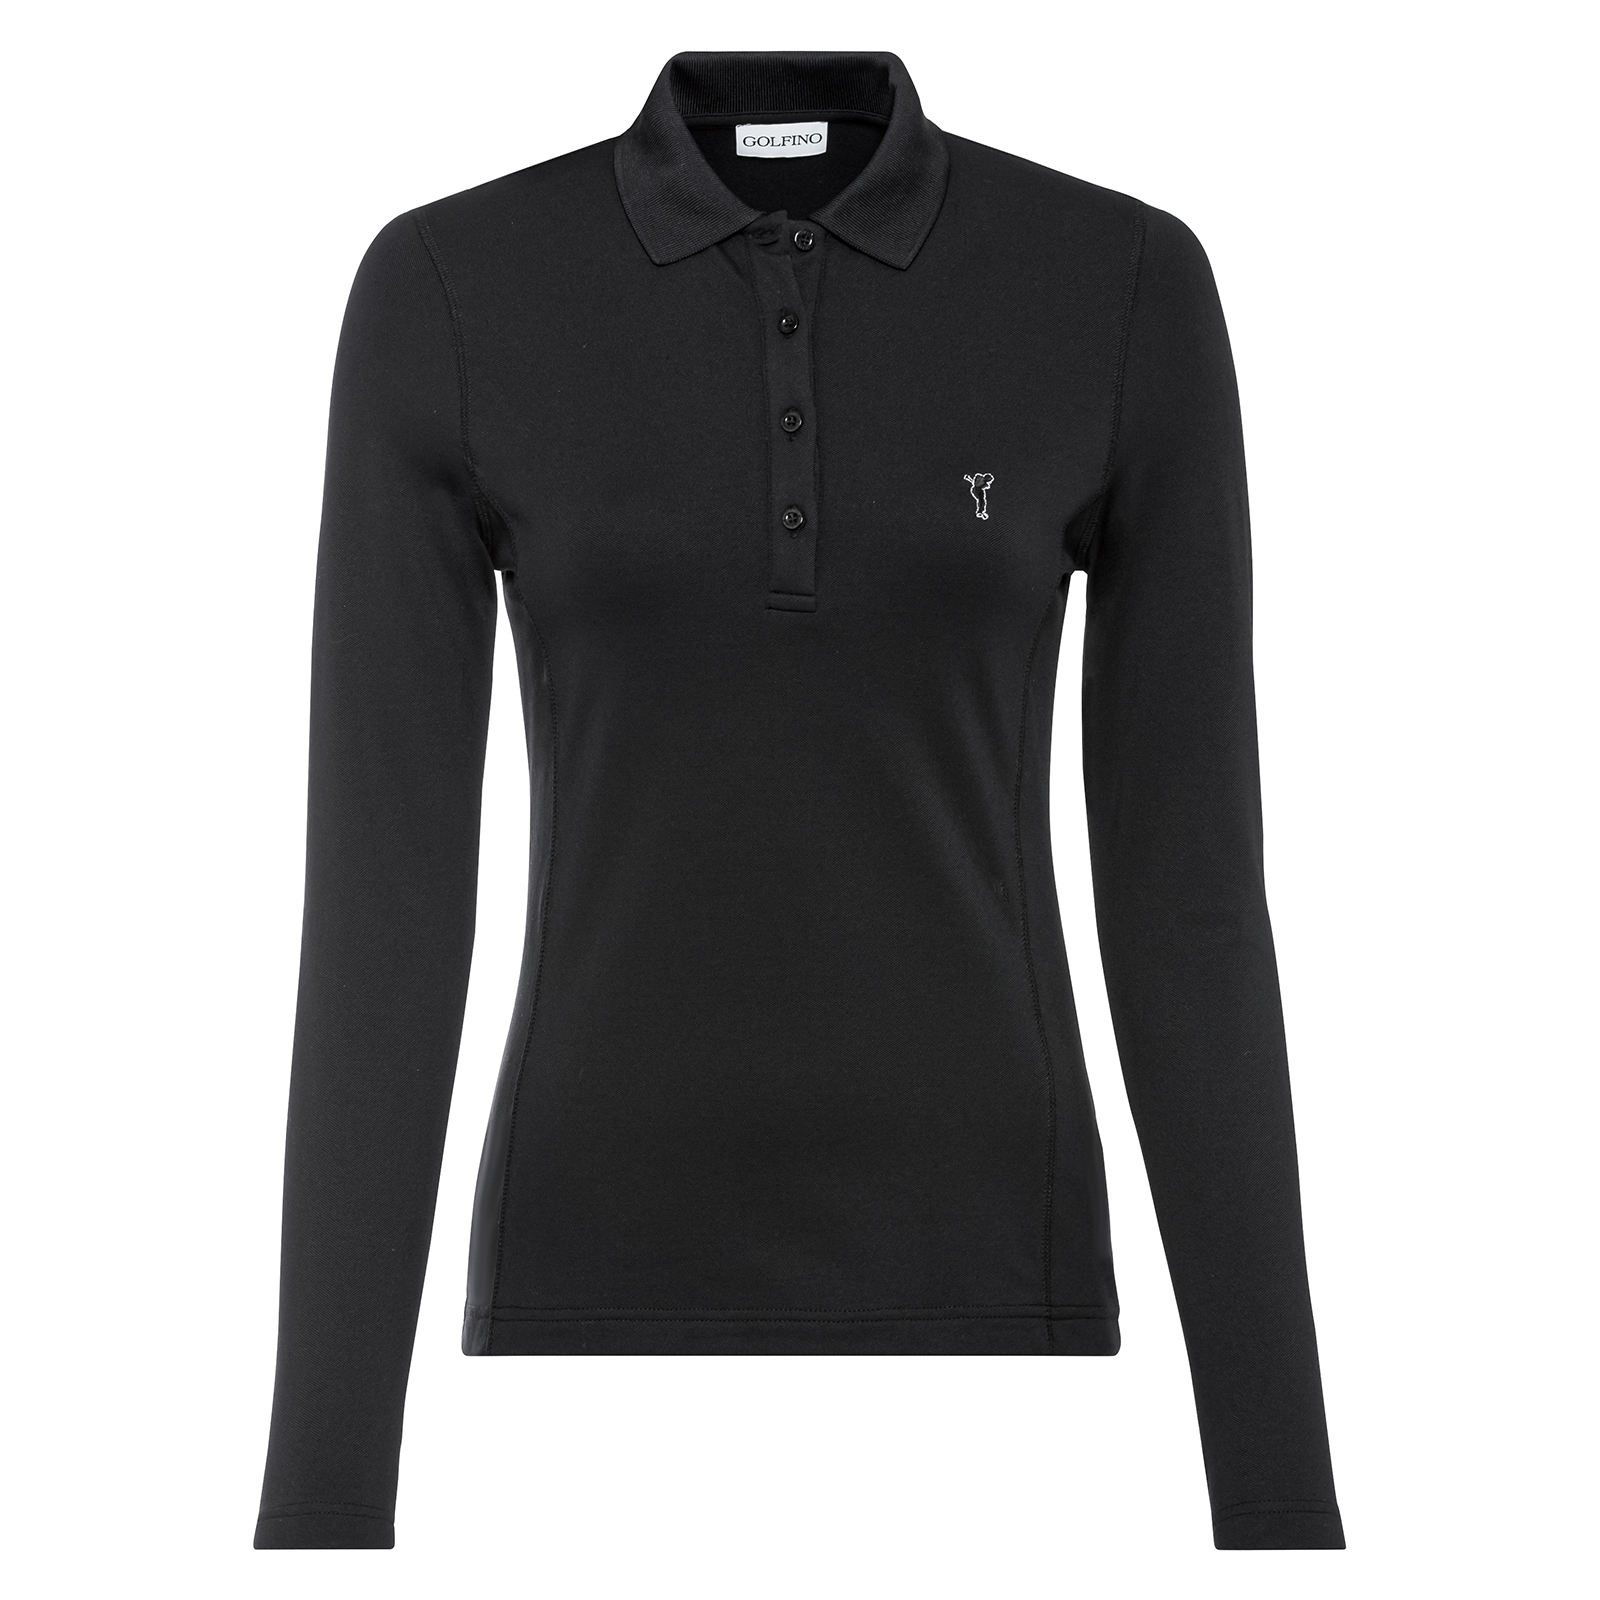 Ladies' long-sleeved polo shirt with ultraviolet protection (UPF) 